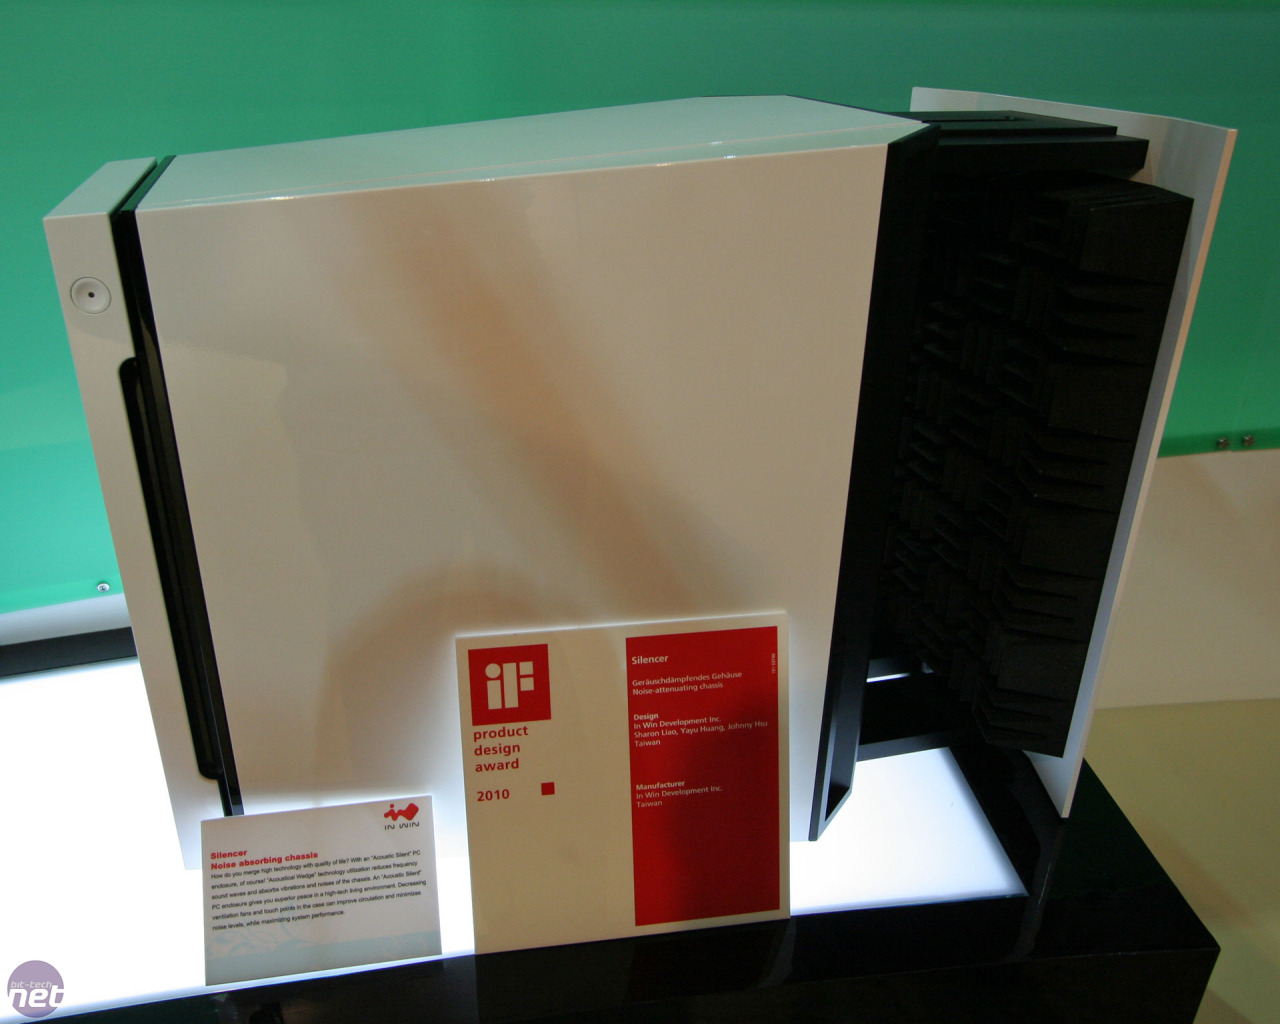 http://images.bit-tech.net/news_images/2010/06/in-win-shows-off-sound-proof-space-case/inwin-silencer-2.jpg